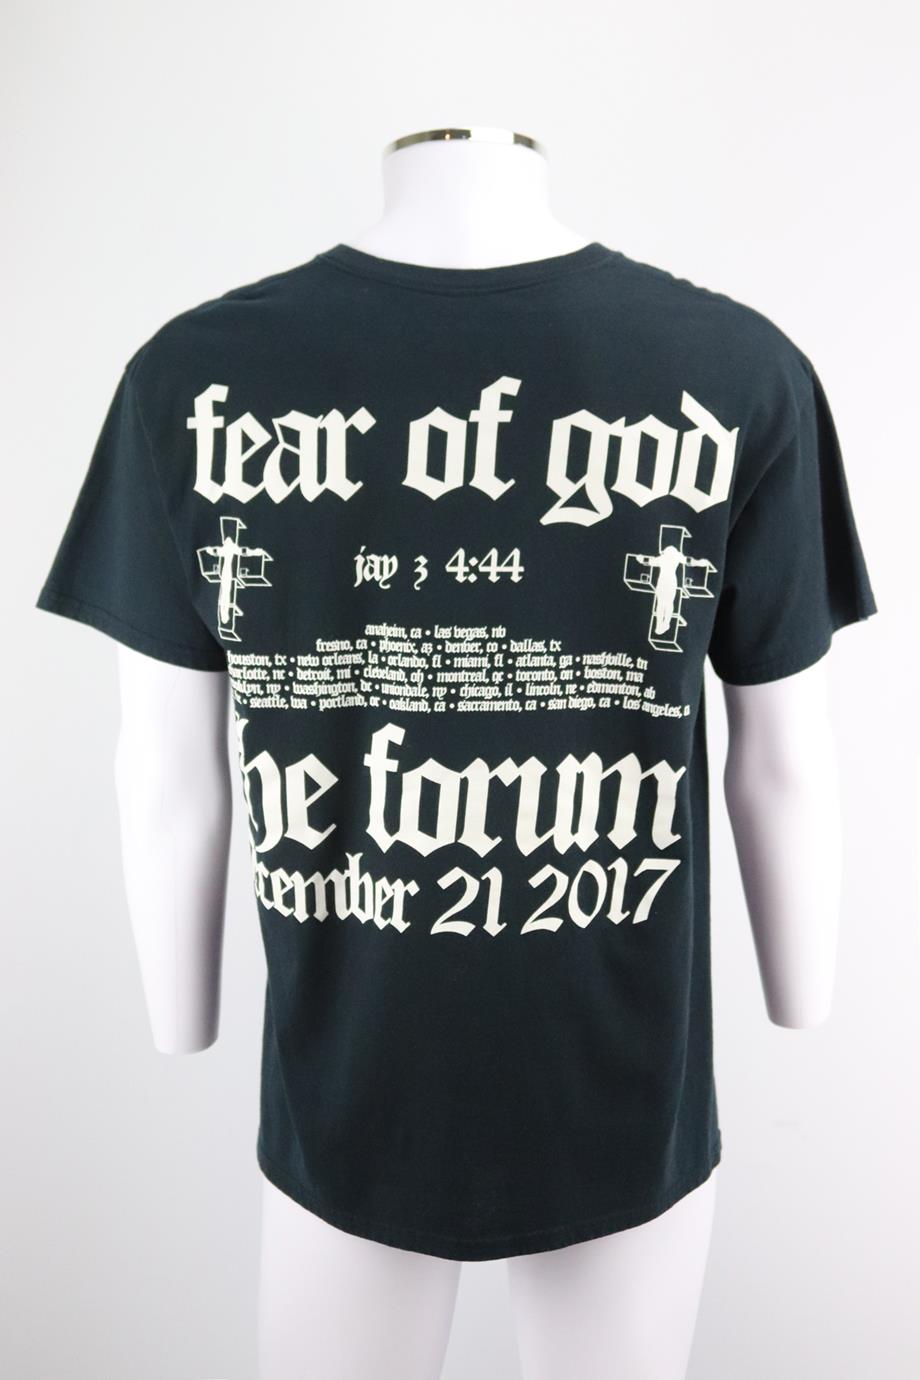 FEAR OF GOD MEN'S PRINTED COTTON JERSEY T-SHIRT LARGE